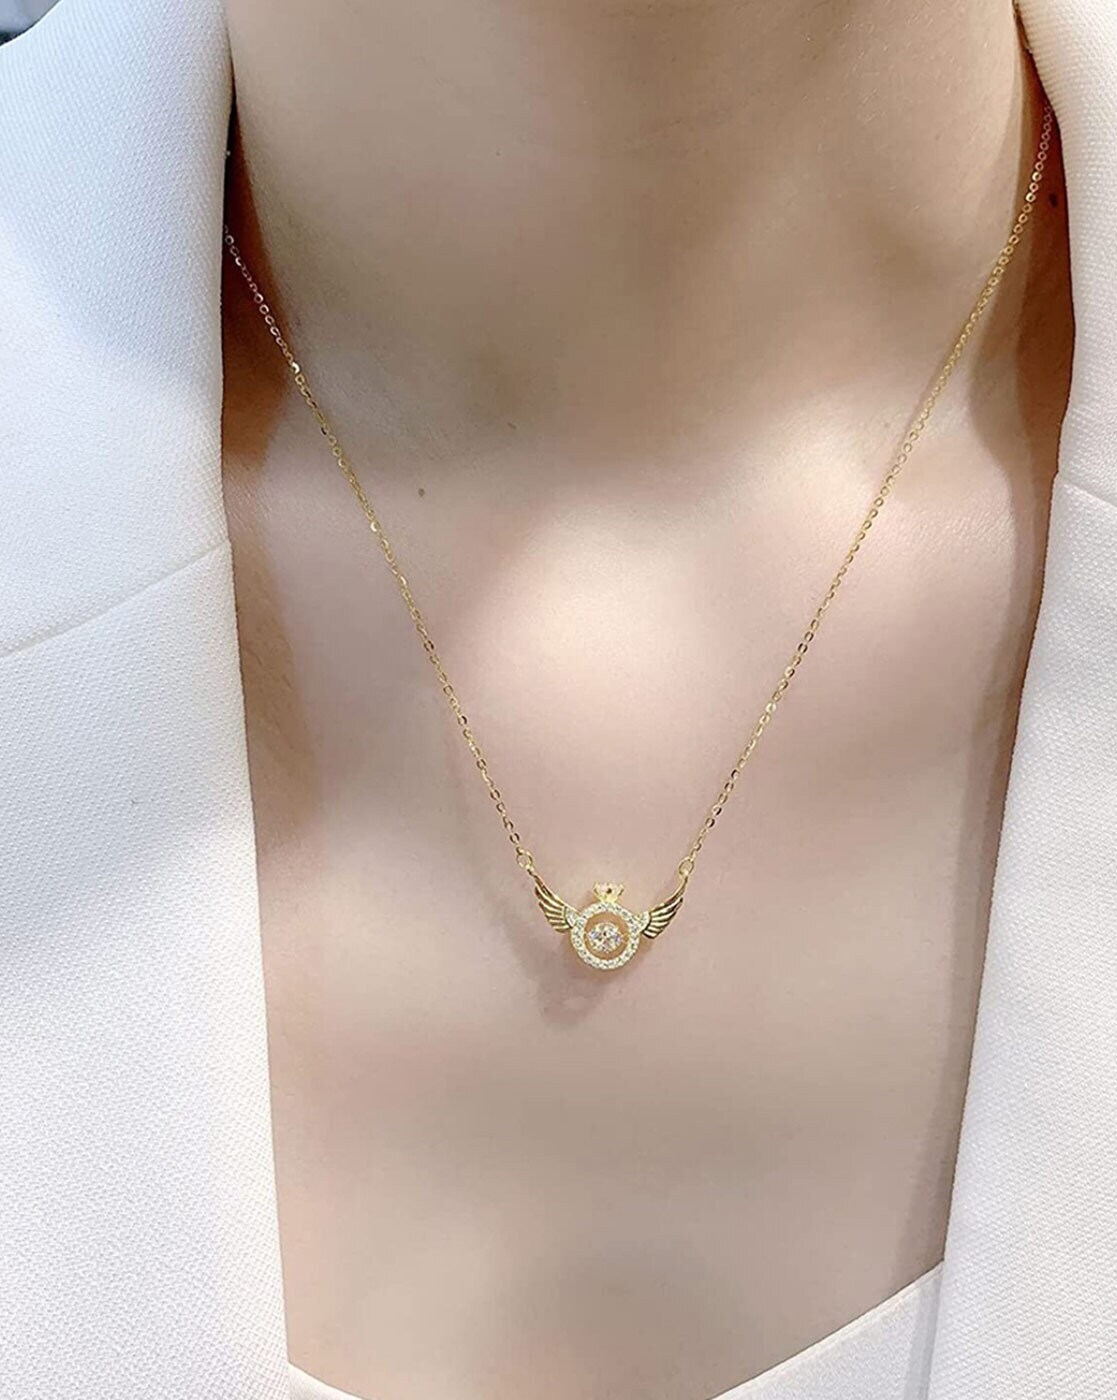 Korean Gold Wheat Pearl Pearl Chain With Pendant With Tassel Charms Elegant  Clavicle Chain Jewelry For Women, Perfect Wedding Gift From Homejewelry,  $11.01 | DHgate.Com